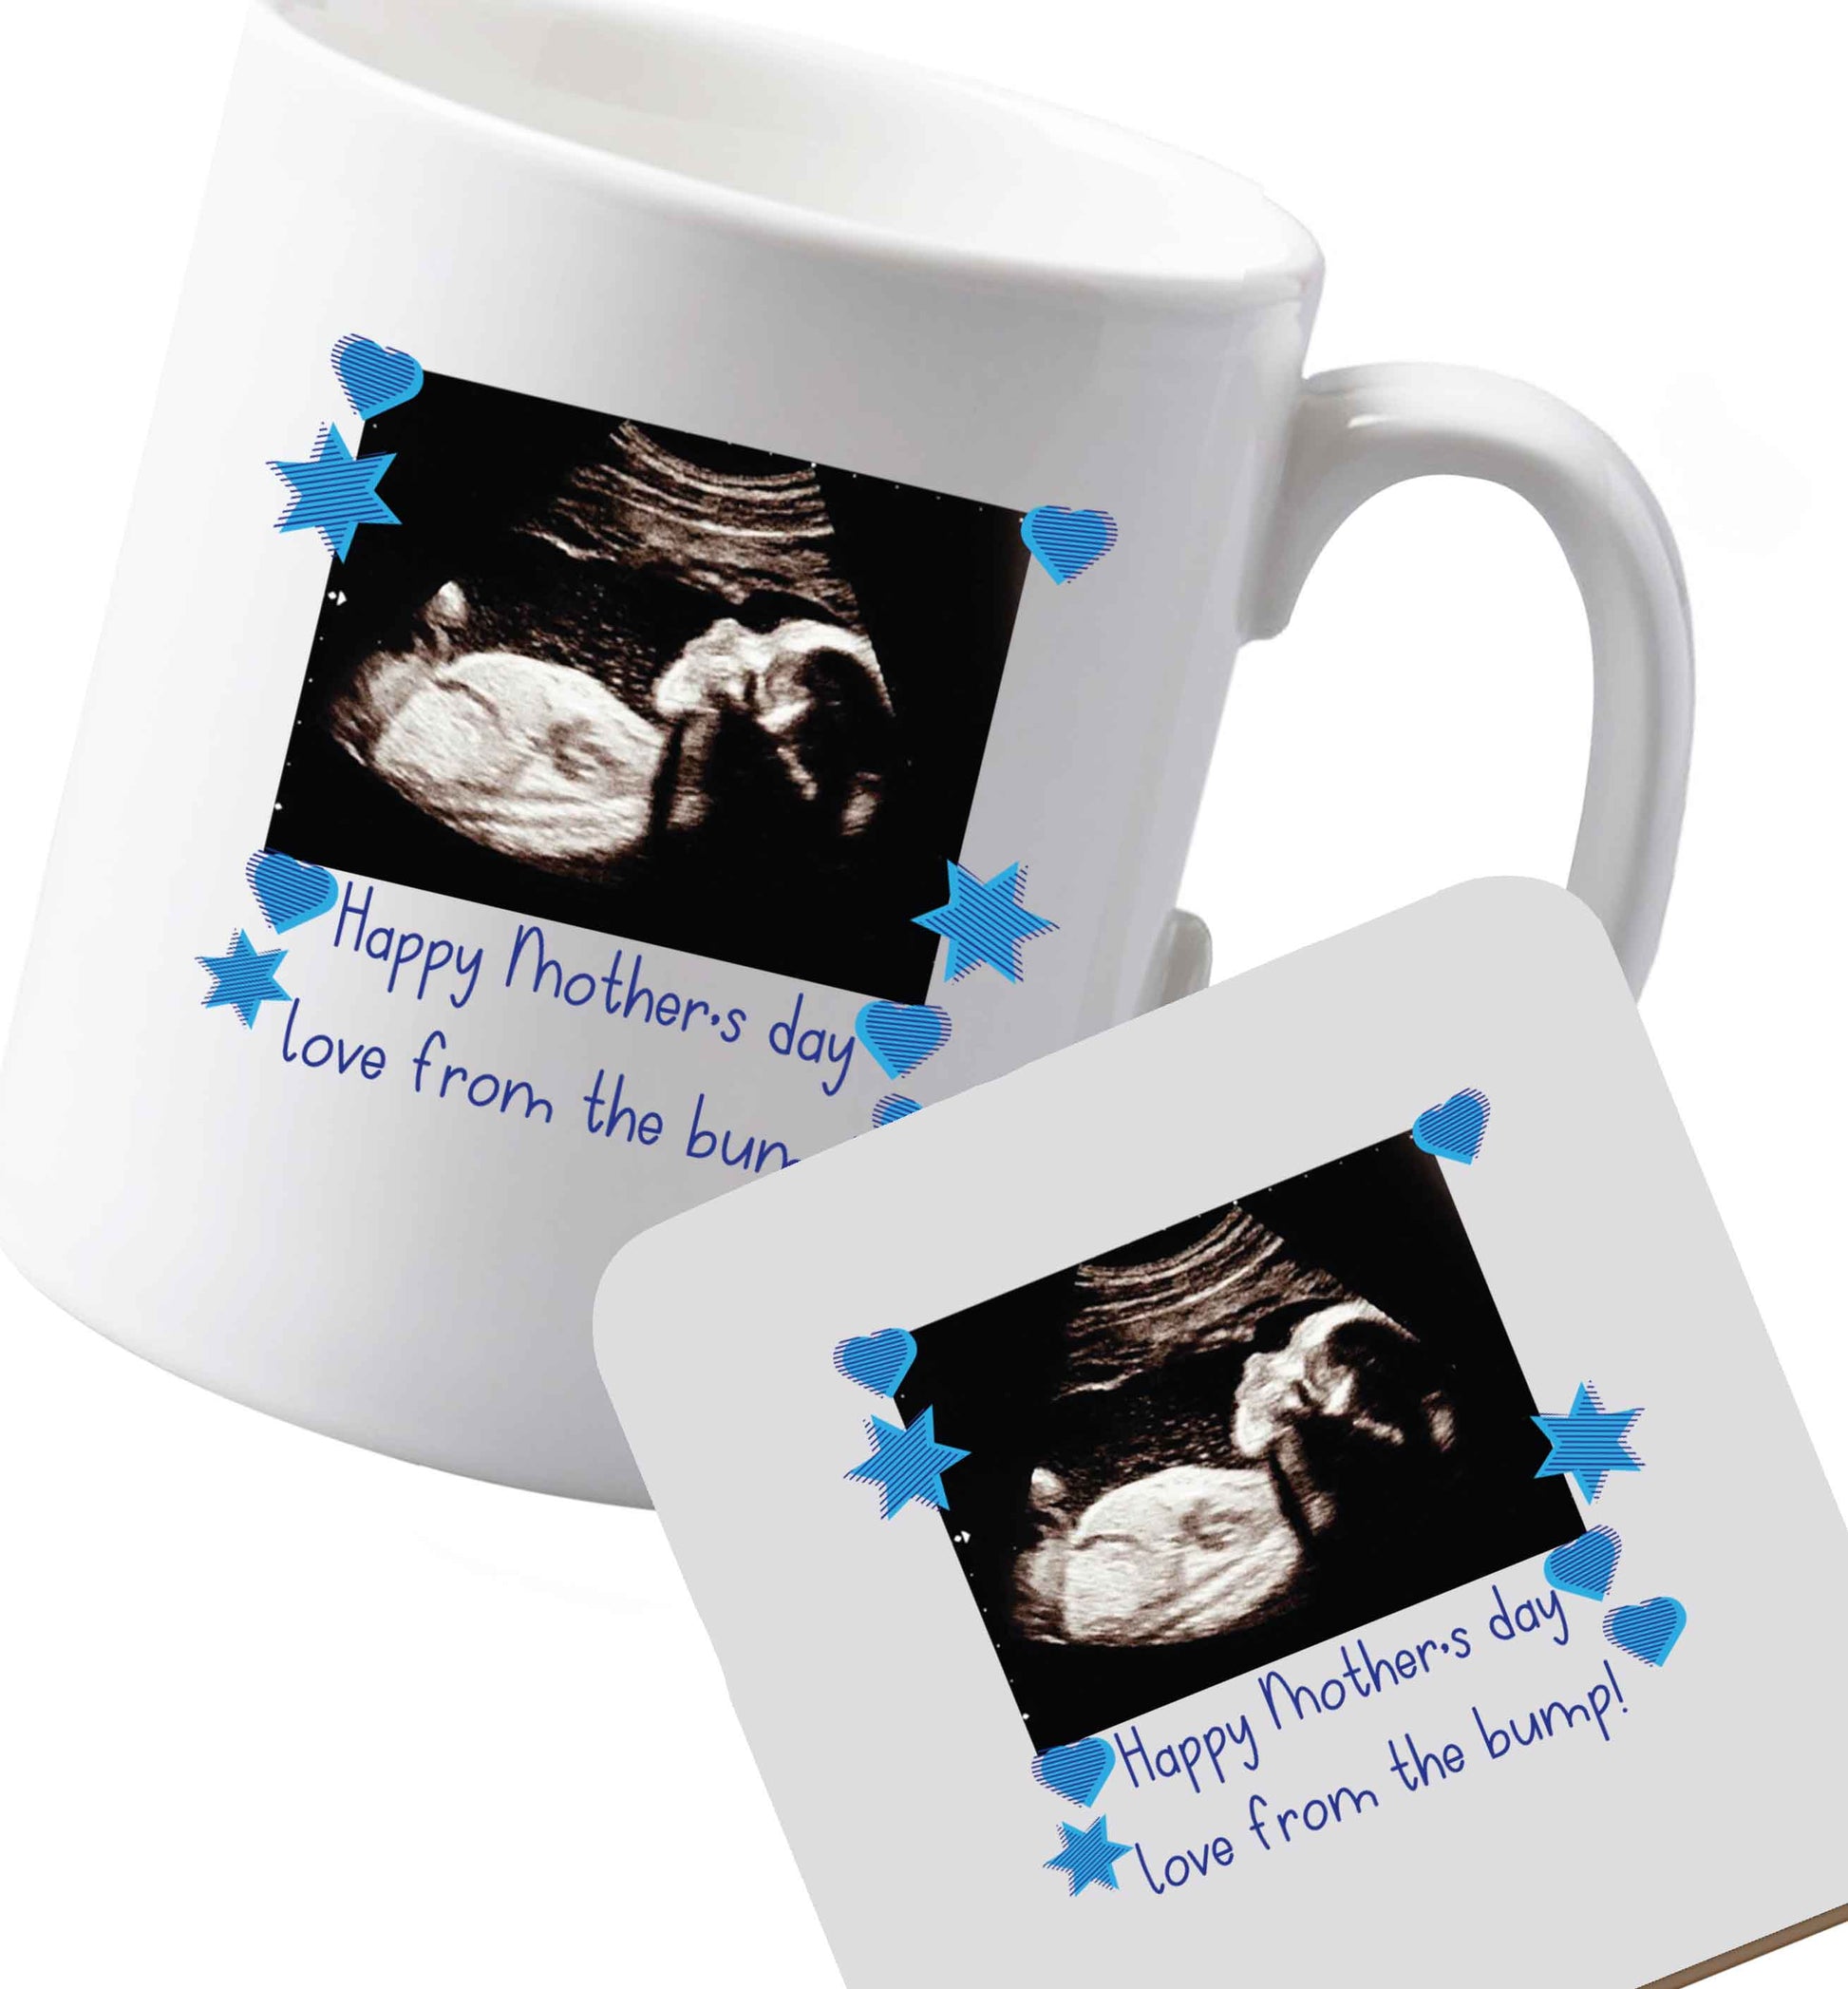 10 oz Ceramic mug and coaster Happy Mother's day love from the bump - blue both sides